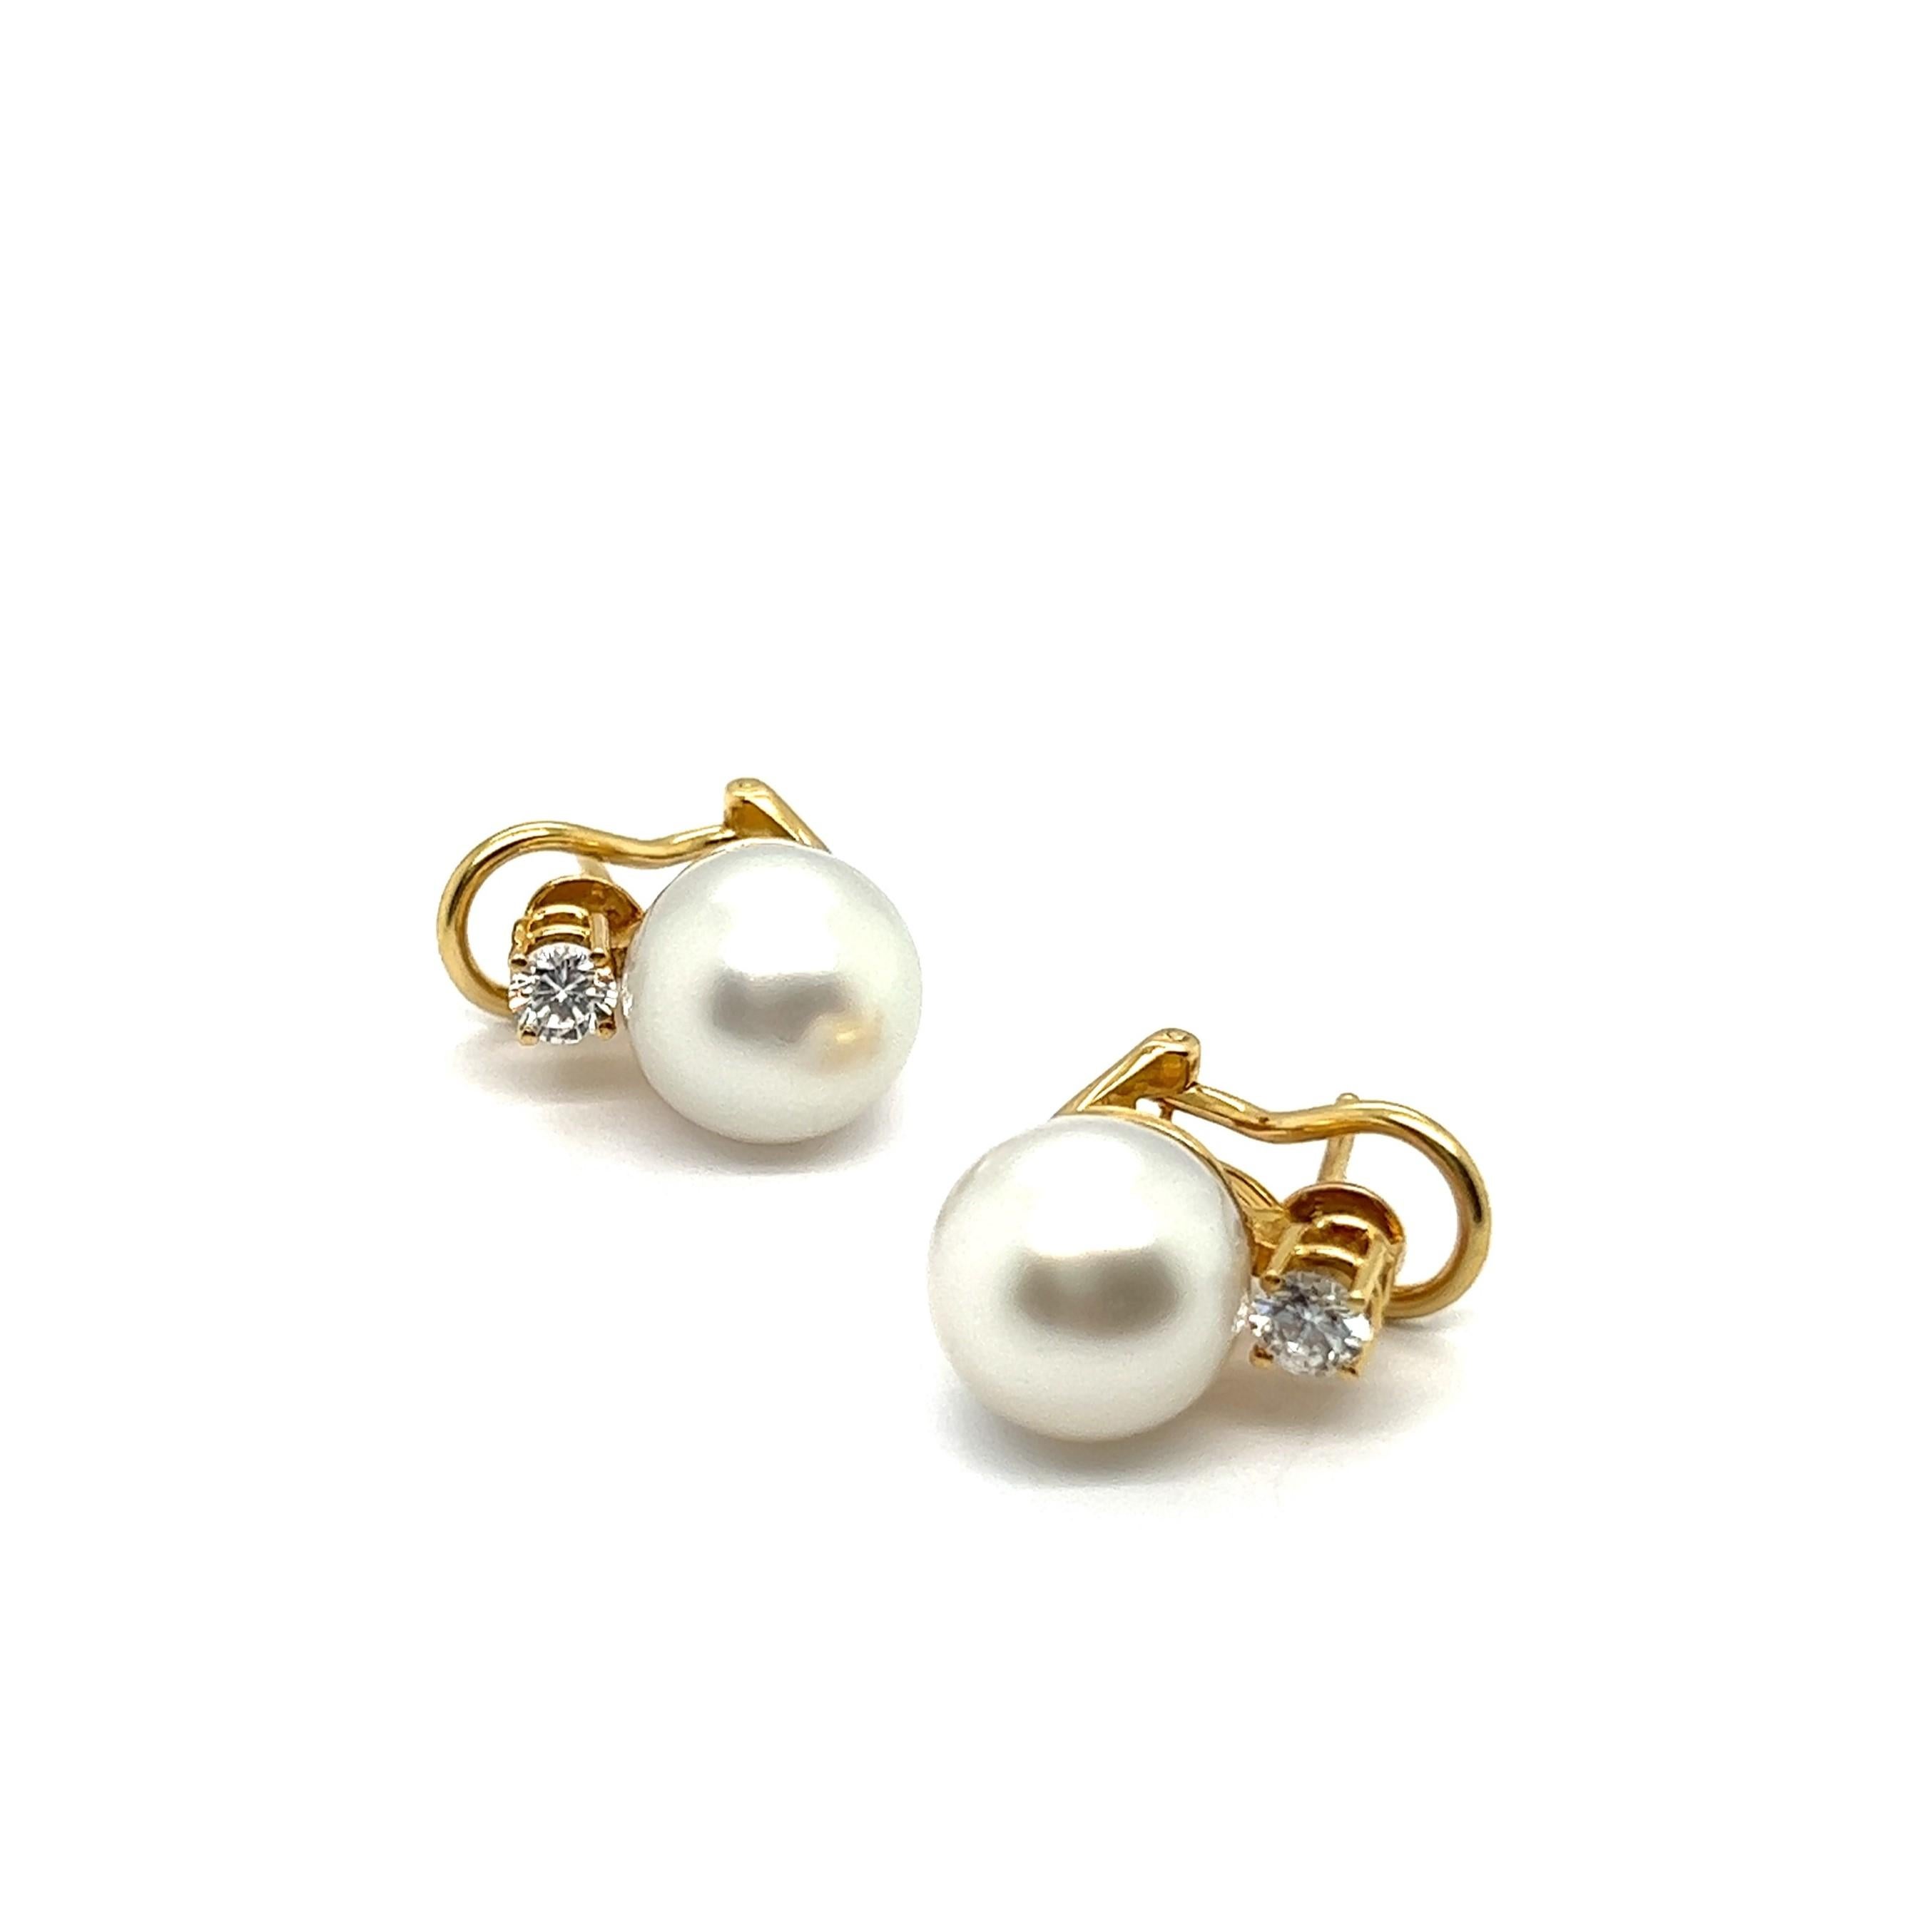 Ear clips with South Sea Pearls & Diamonds in 18 Karat Yellow Gold 7